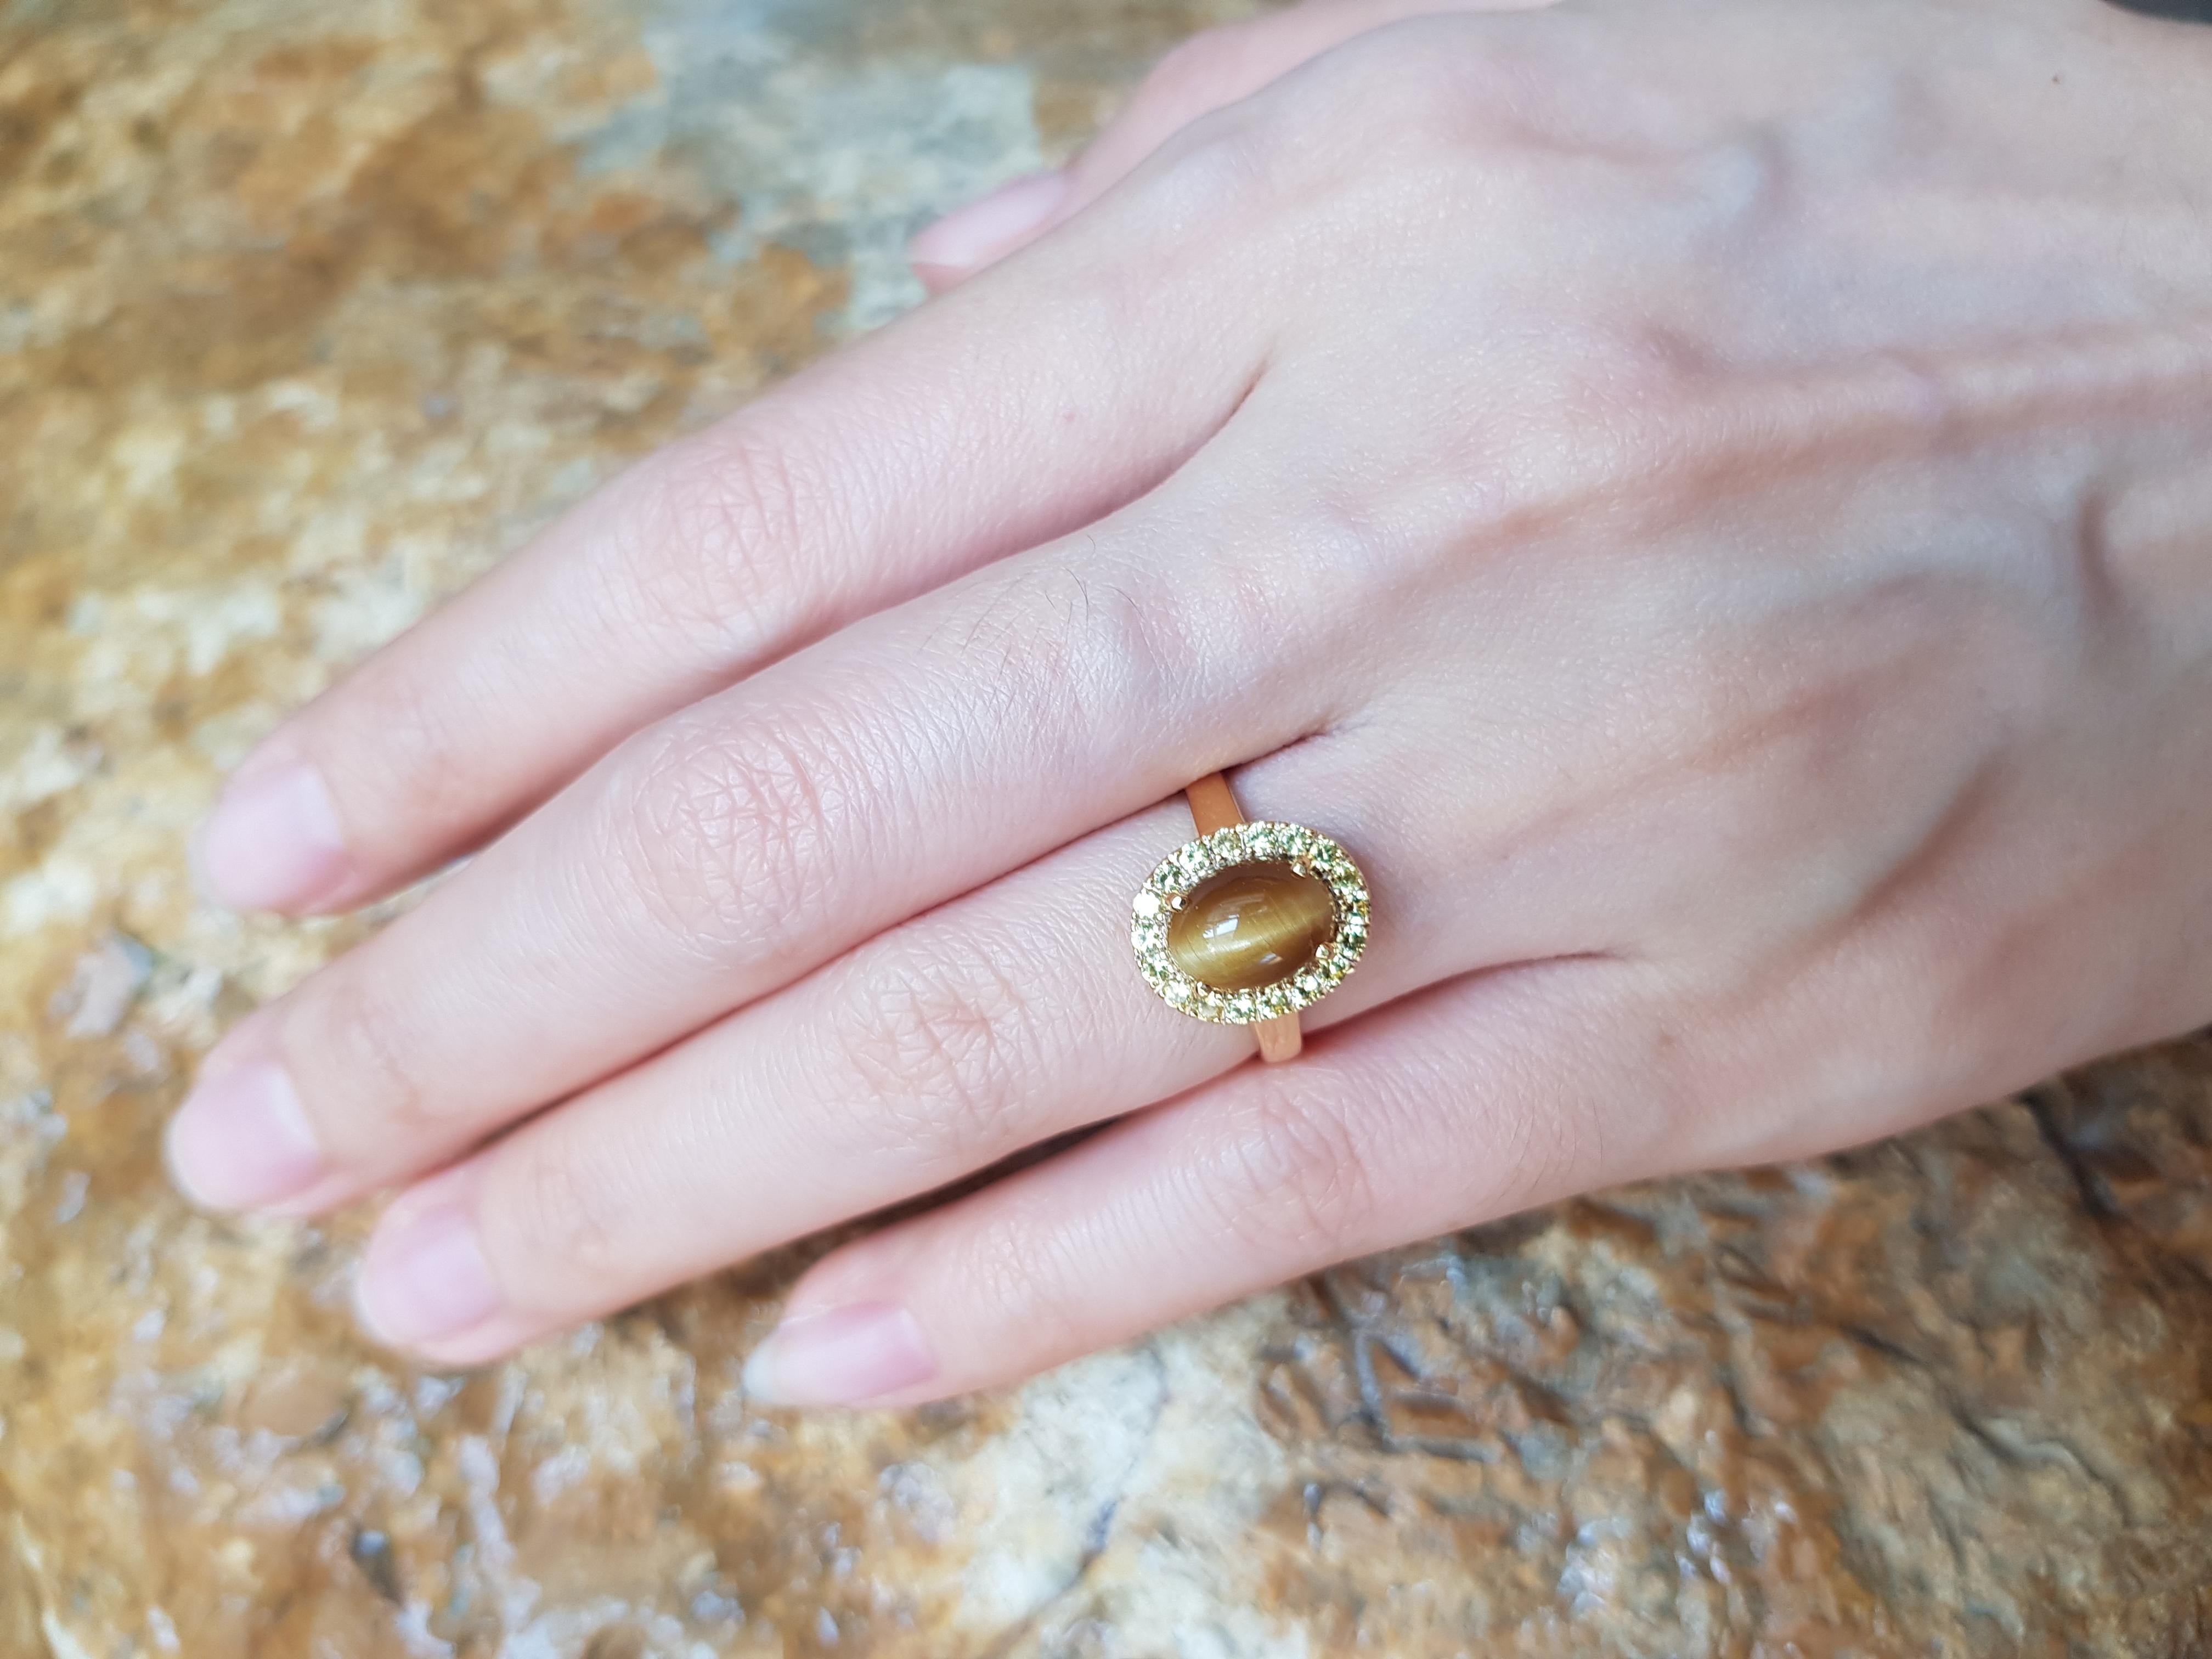 Tiger's Eye 1.18 carats with Yellow Sapphire 1.32 carat Ring set in 18 Karat Gold Settings

Width: 1.0 cm
Length: 1.3 cm 
Ring Size: 49

